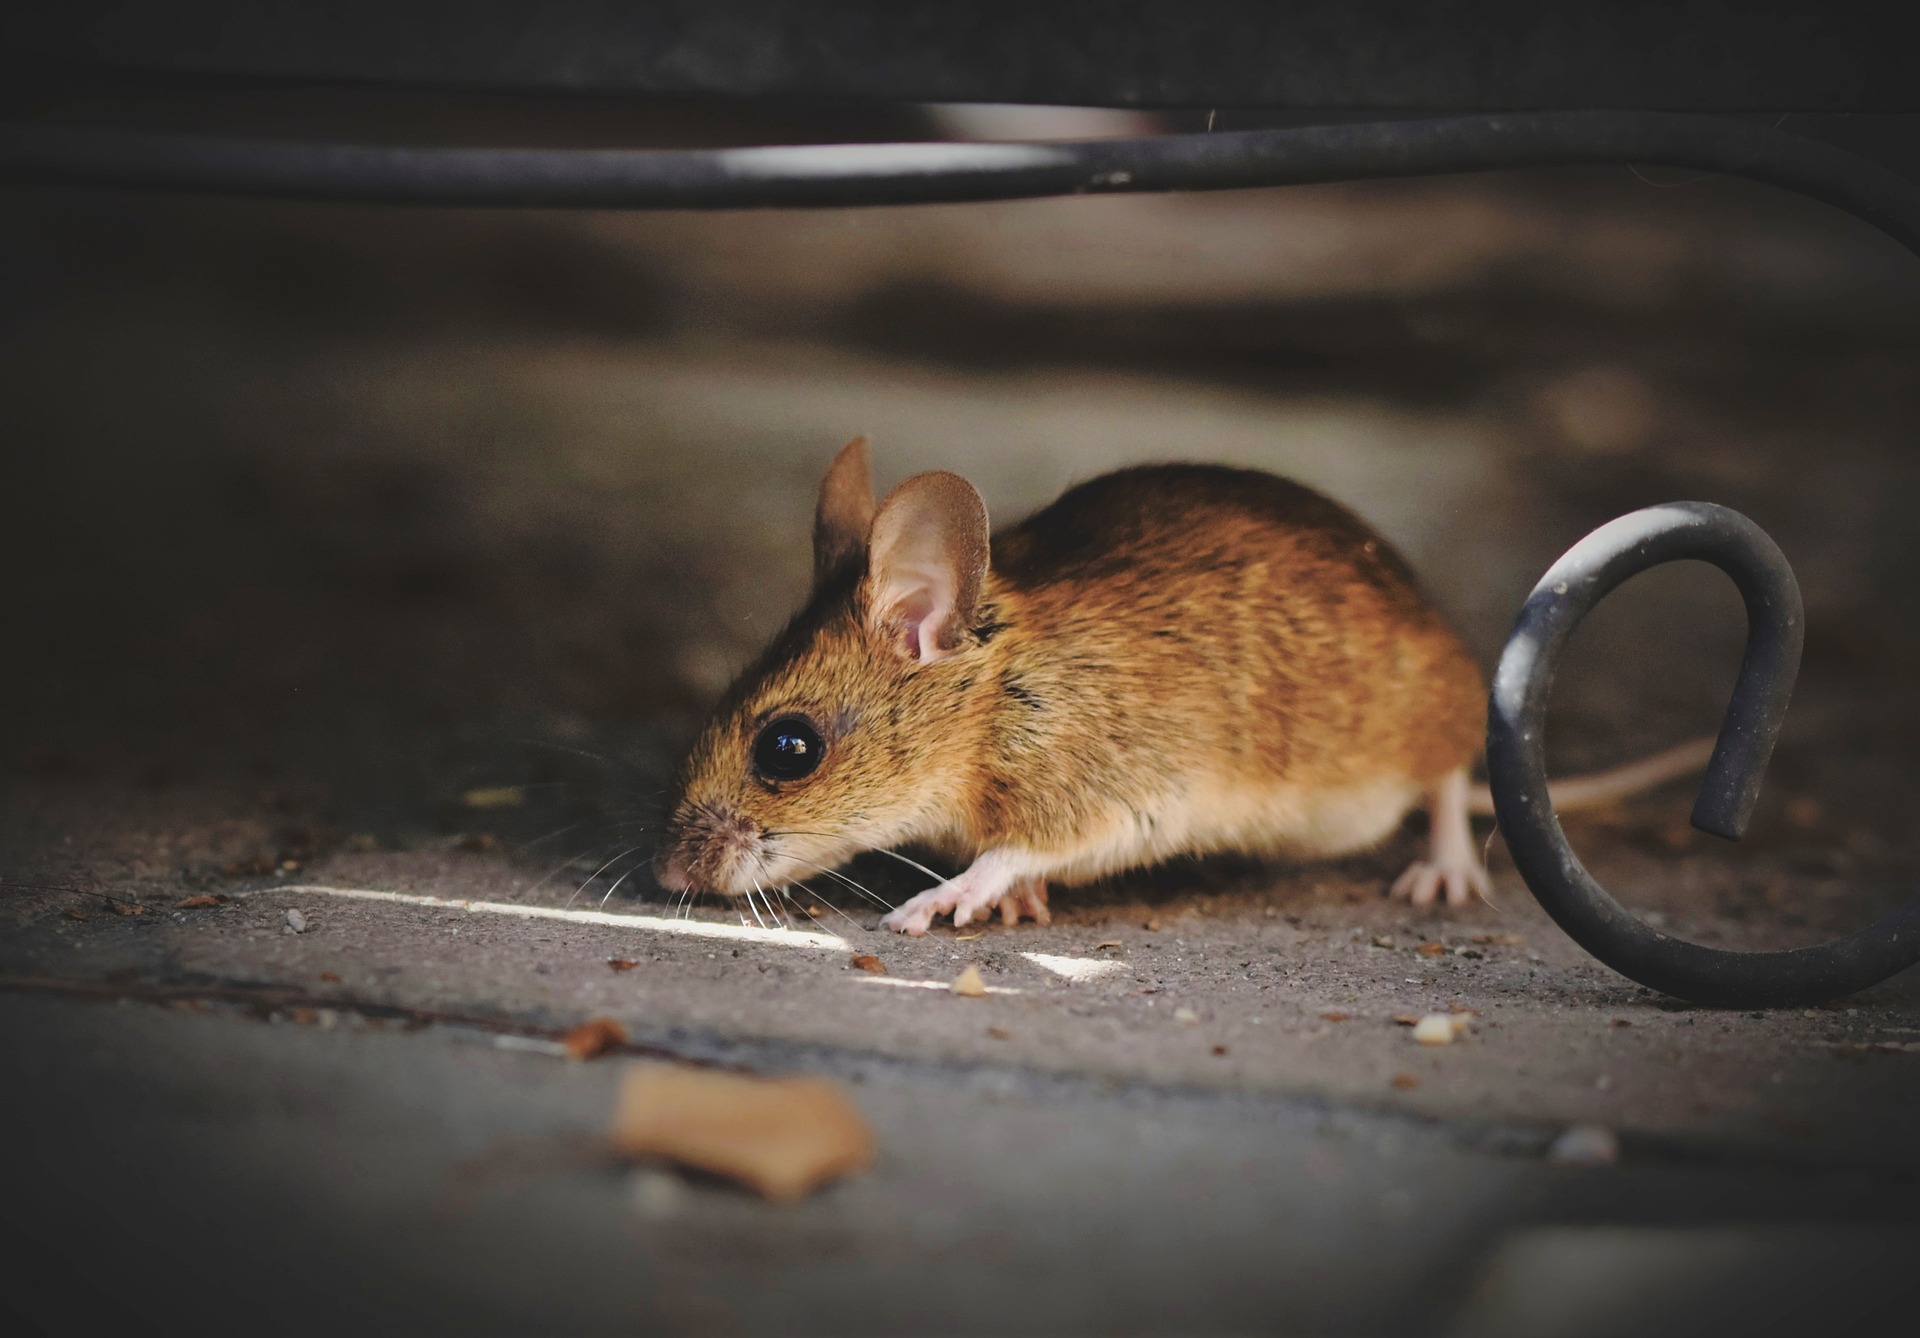 Hero image for common winter pests - shows a house mouse